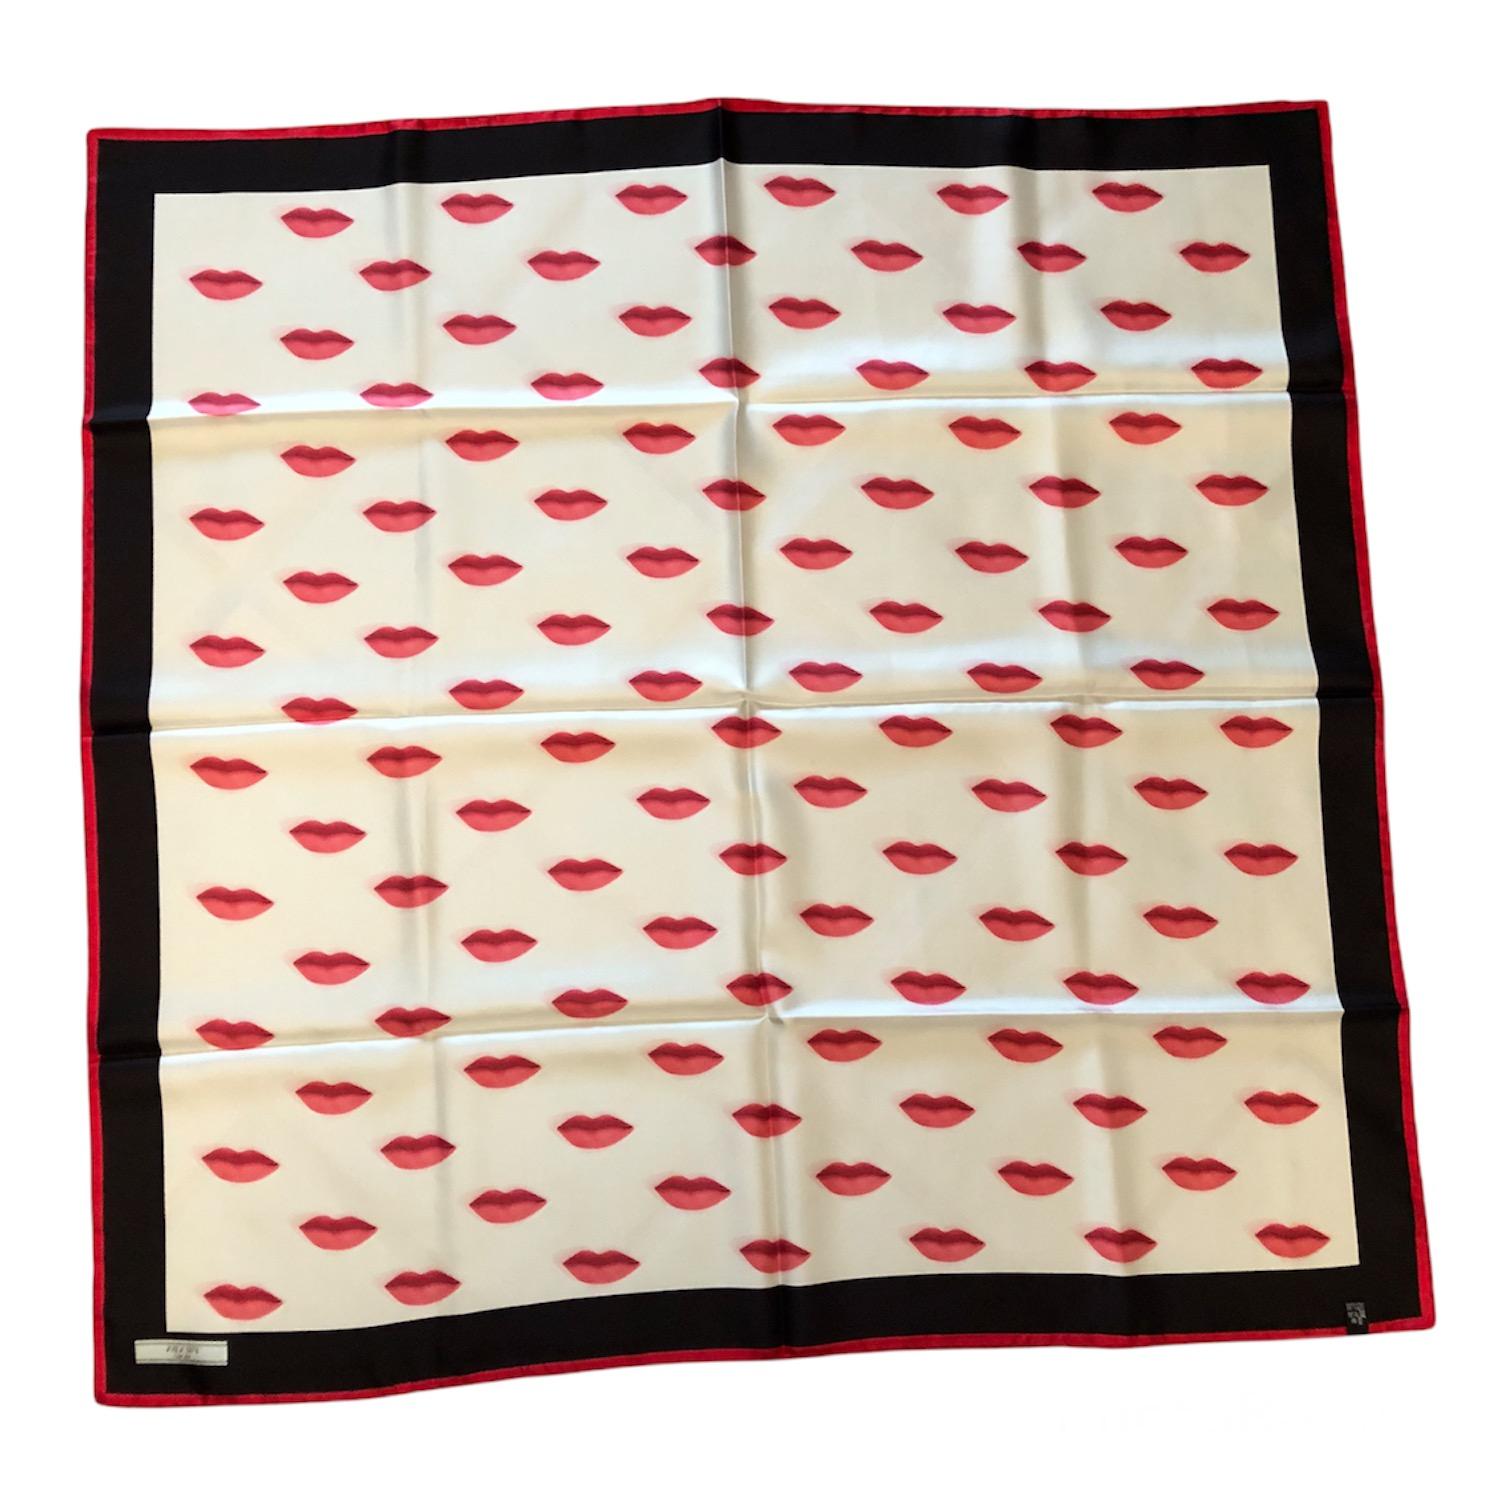 Prada silk scarf with lips. It measures approximately 90 x 90 cm. New never been used.